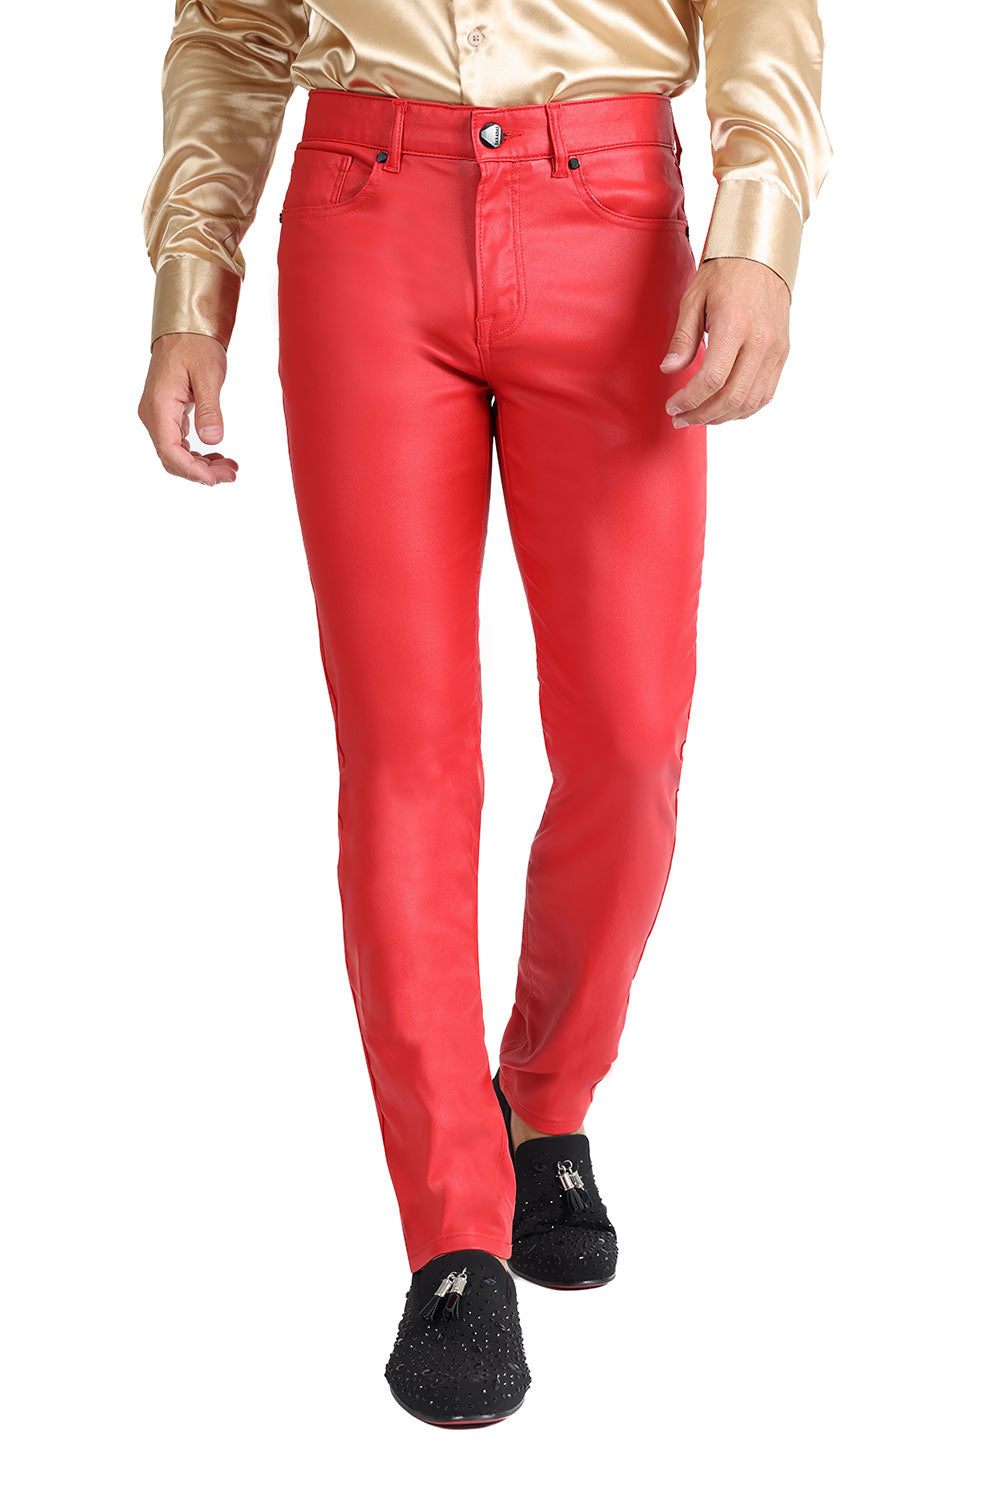 Barabas Men's Glossy Shiny Design Sparkly Luxury Dress Pants 2CPW27 Red